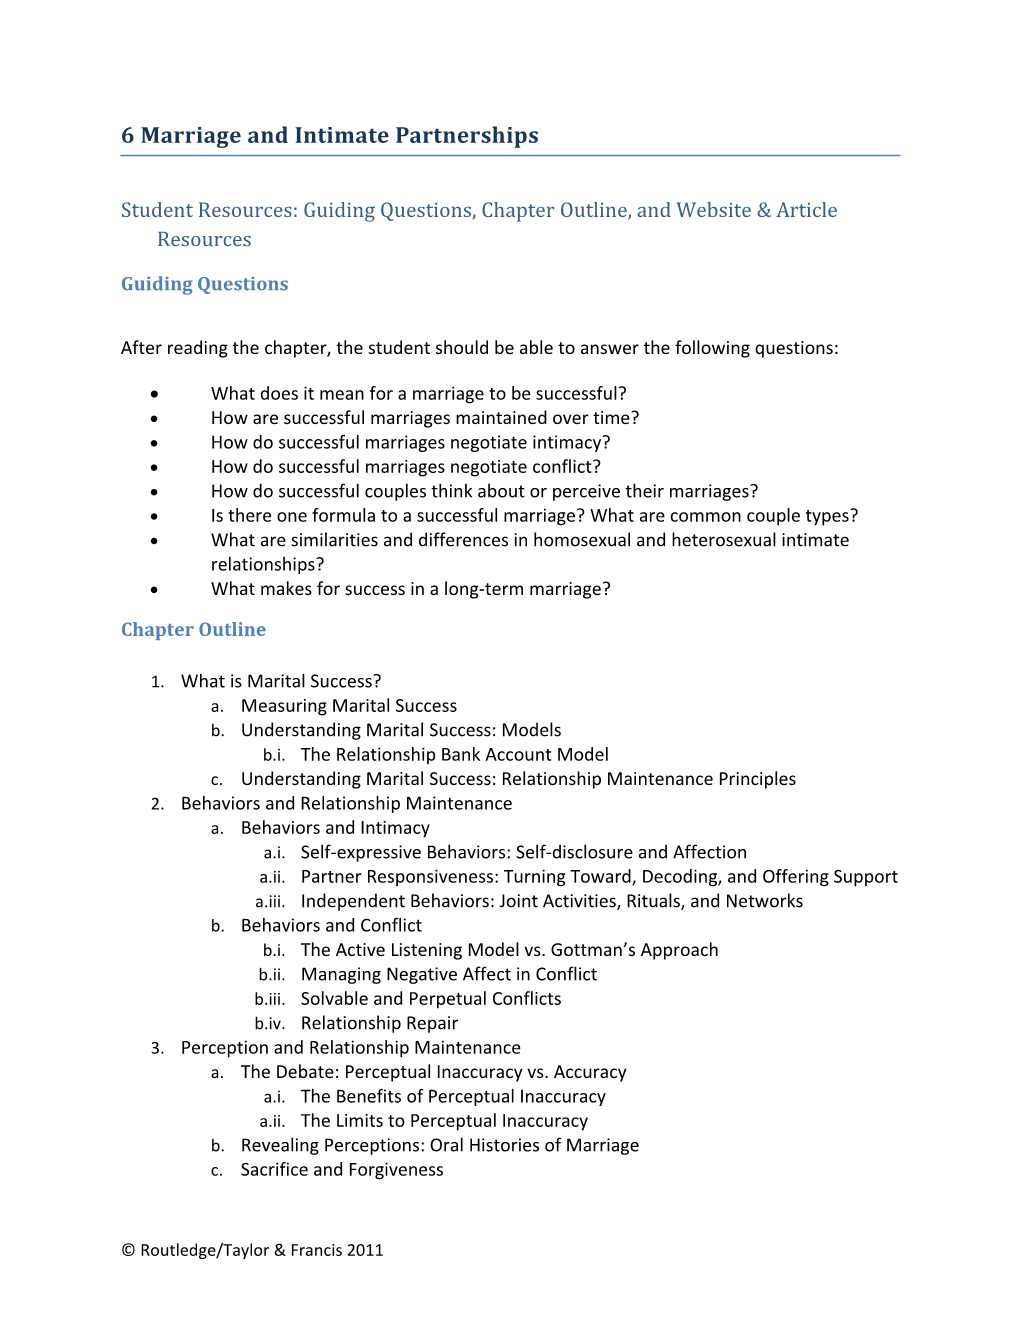 Student Resources: Guiding Questions, Chapter Outline, and Website & Article Resources